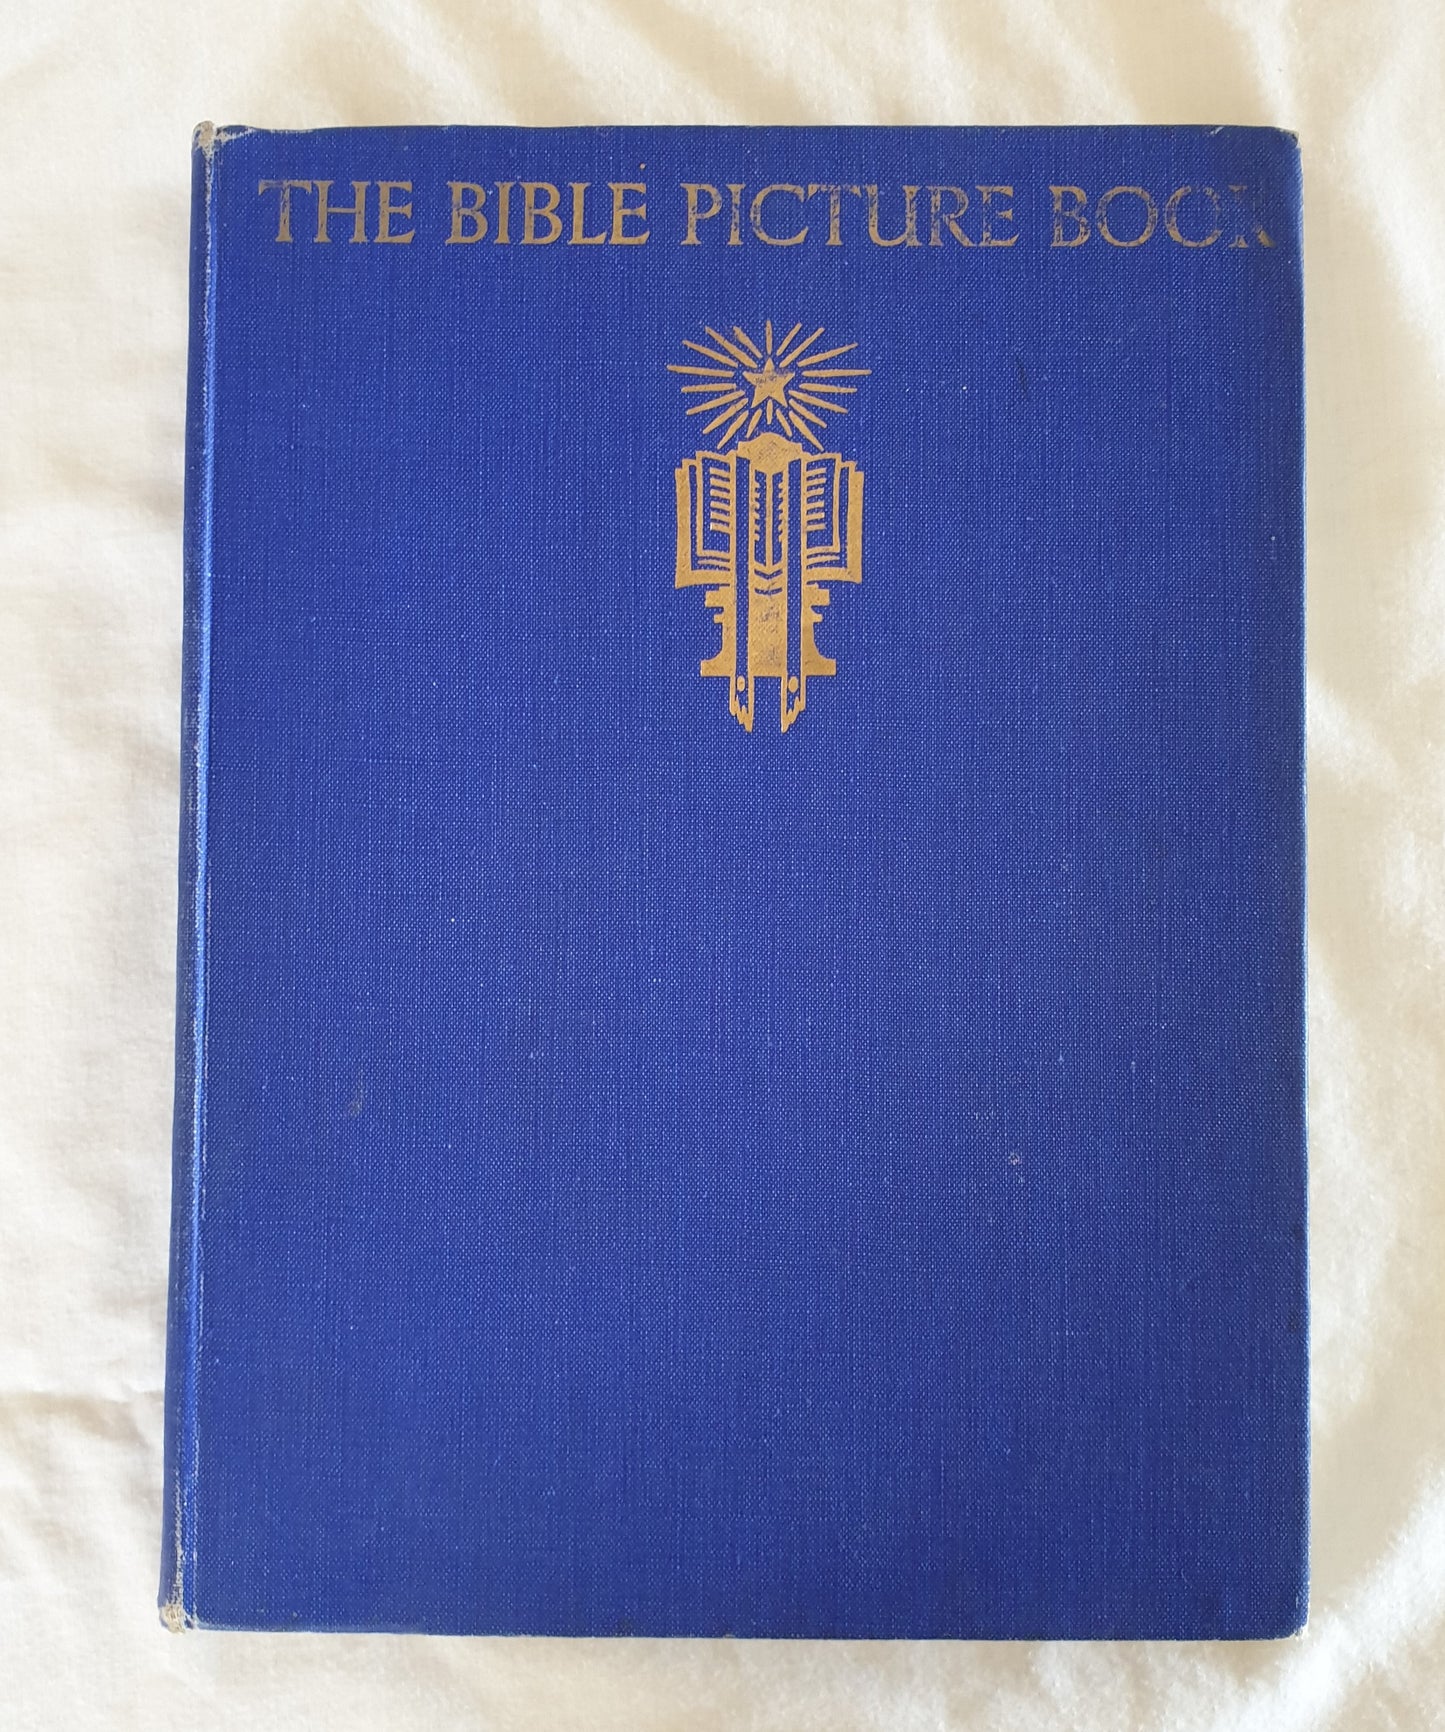 The Bible Christian Book by Muriel J. Chalmers